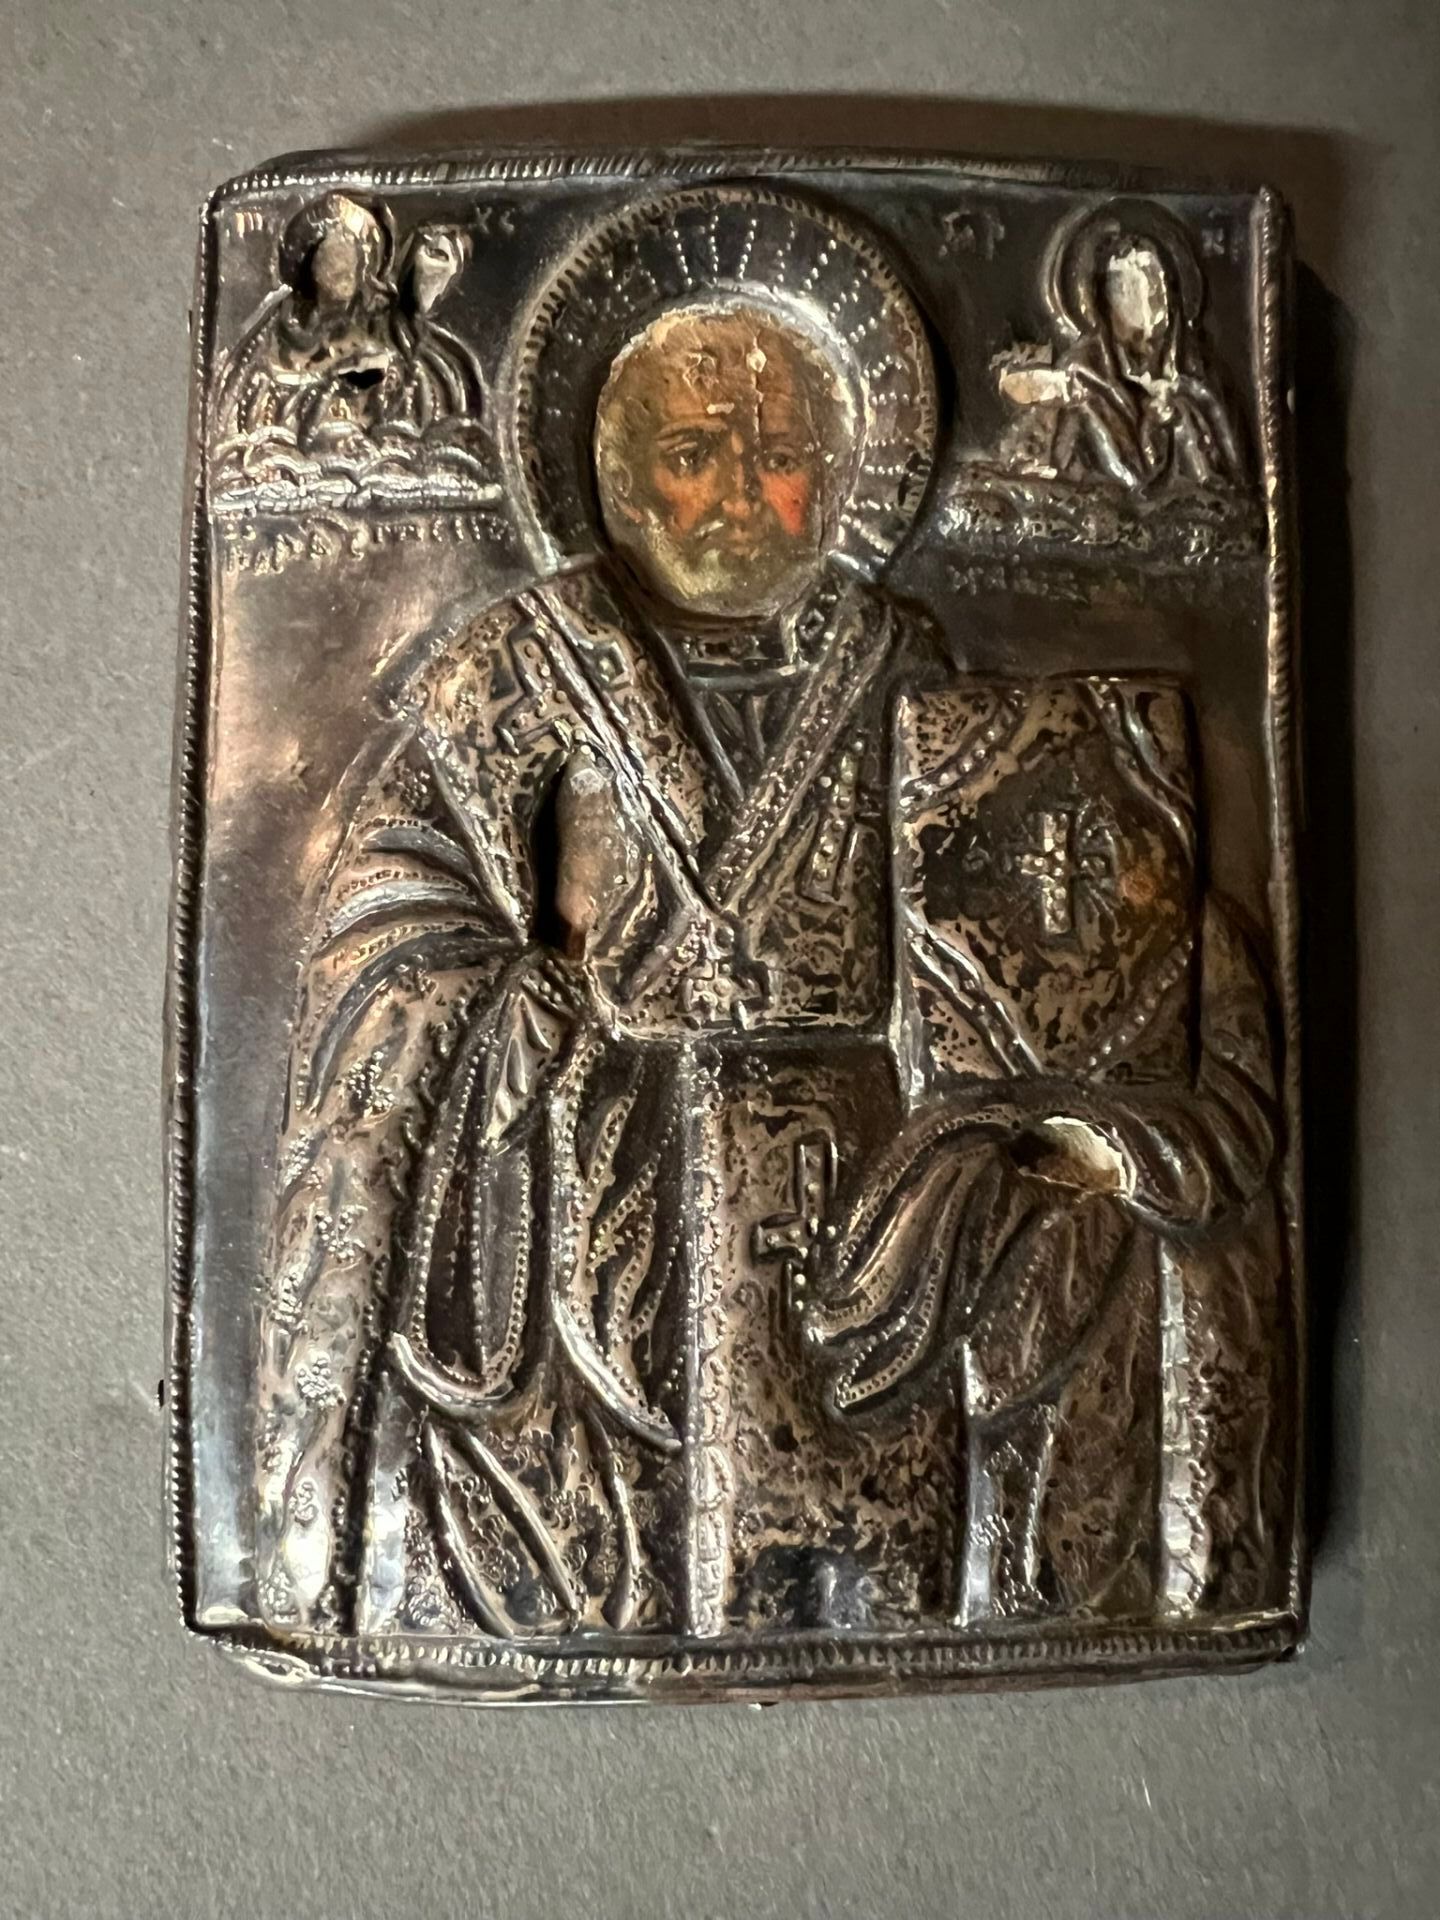 Null Icon with effigy of a saint, silver oklad, wooden core
11.5 x 8.5 cm